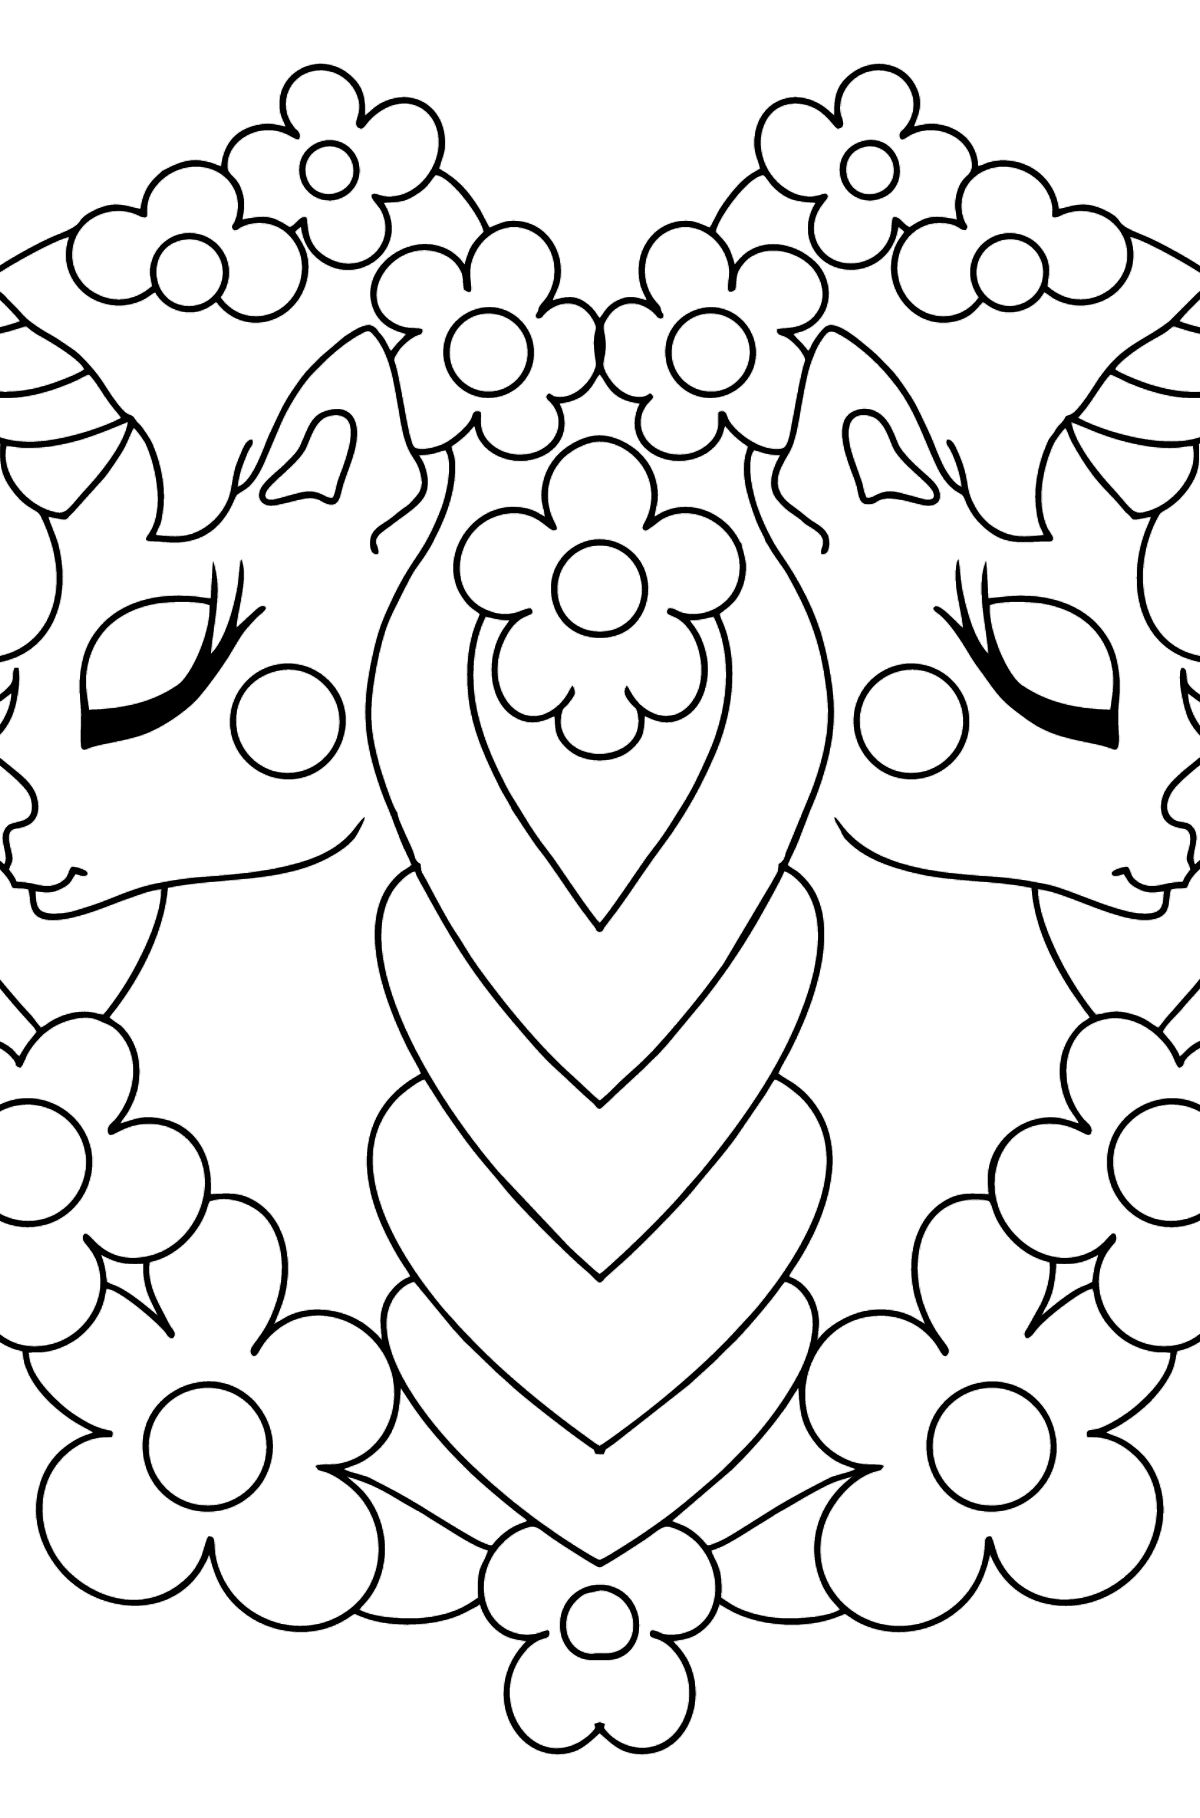 Difficult Unicorn Coloring Book - Coloring Pages for Kids